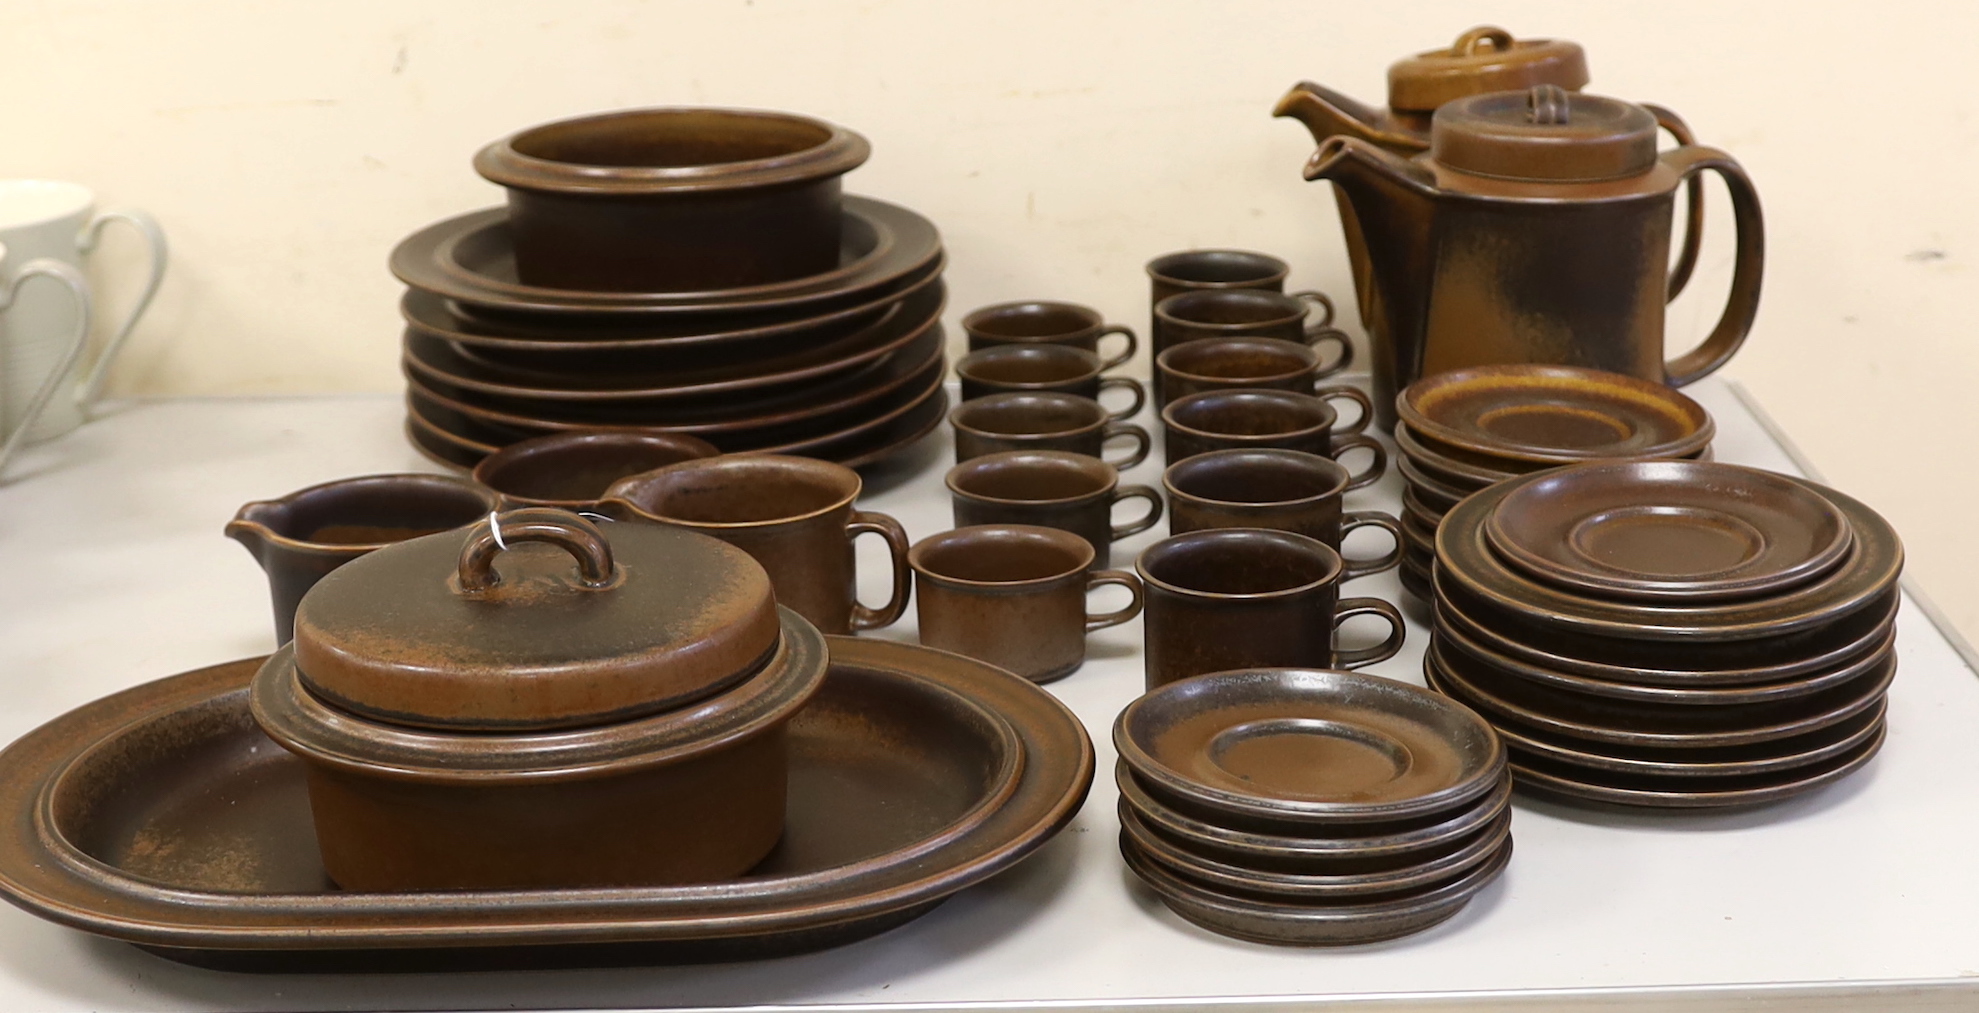 Arabia Ruska, a quantity of stoneware tea and dinnerware including cups and saucers, oval dish and plates